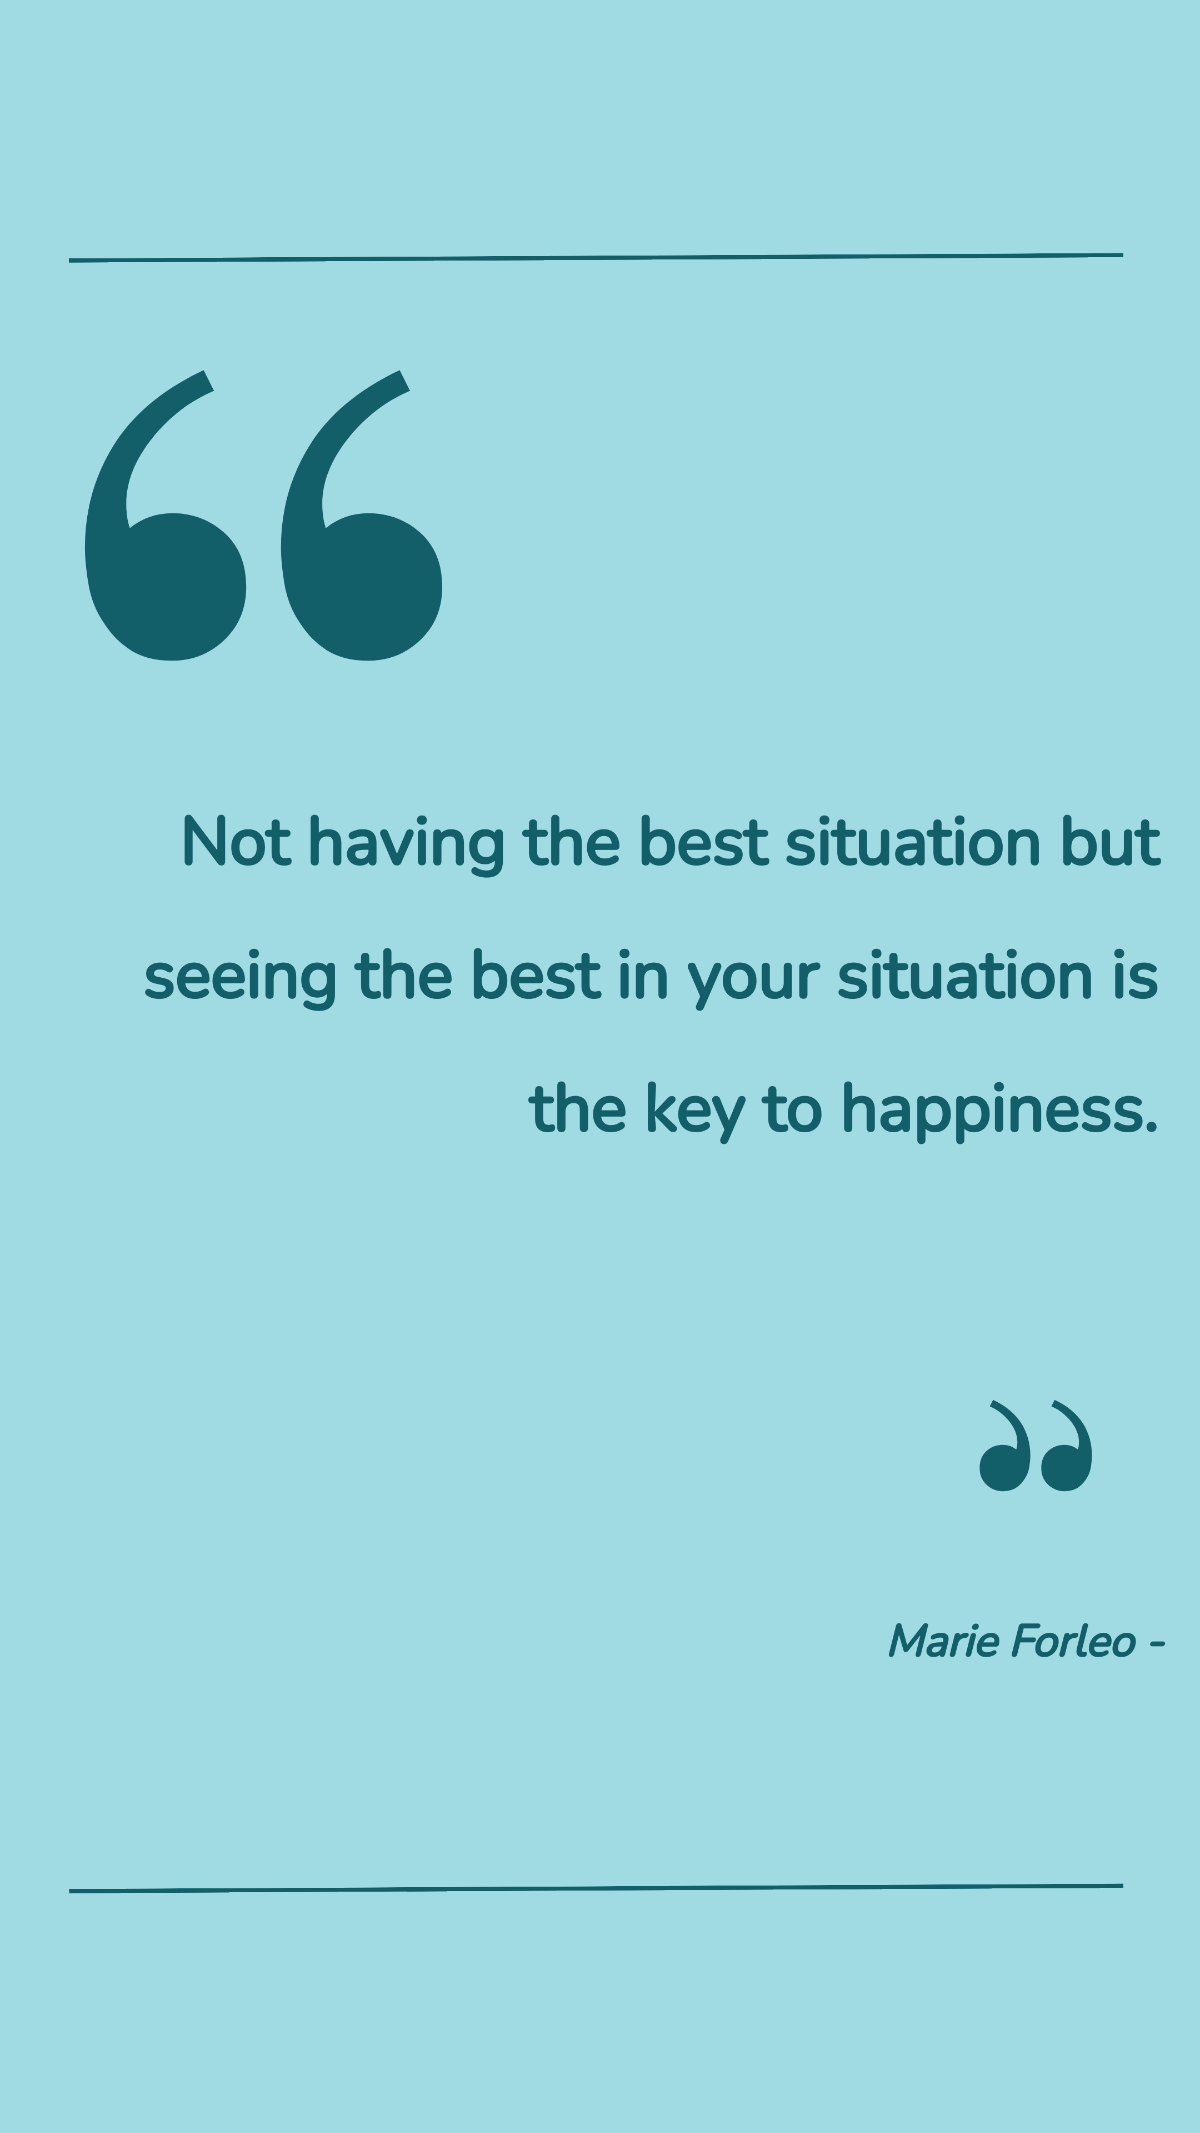 Marie Forleo - Not having the best situation but seeing the best in your situation is the key to happiness. Template